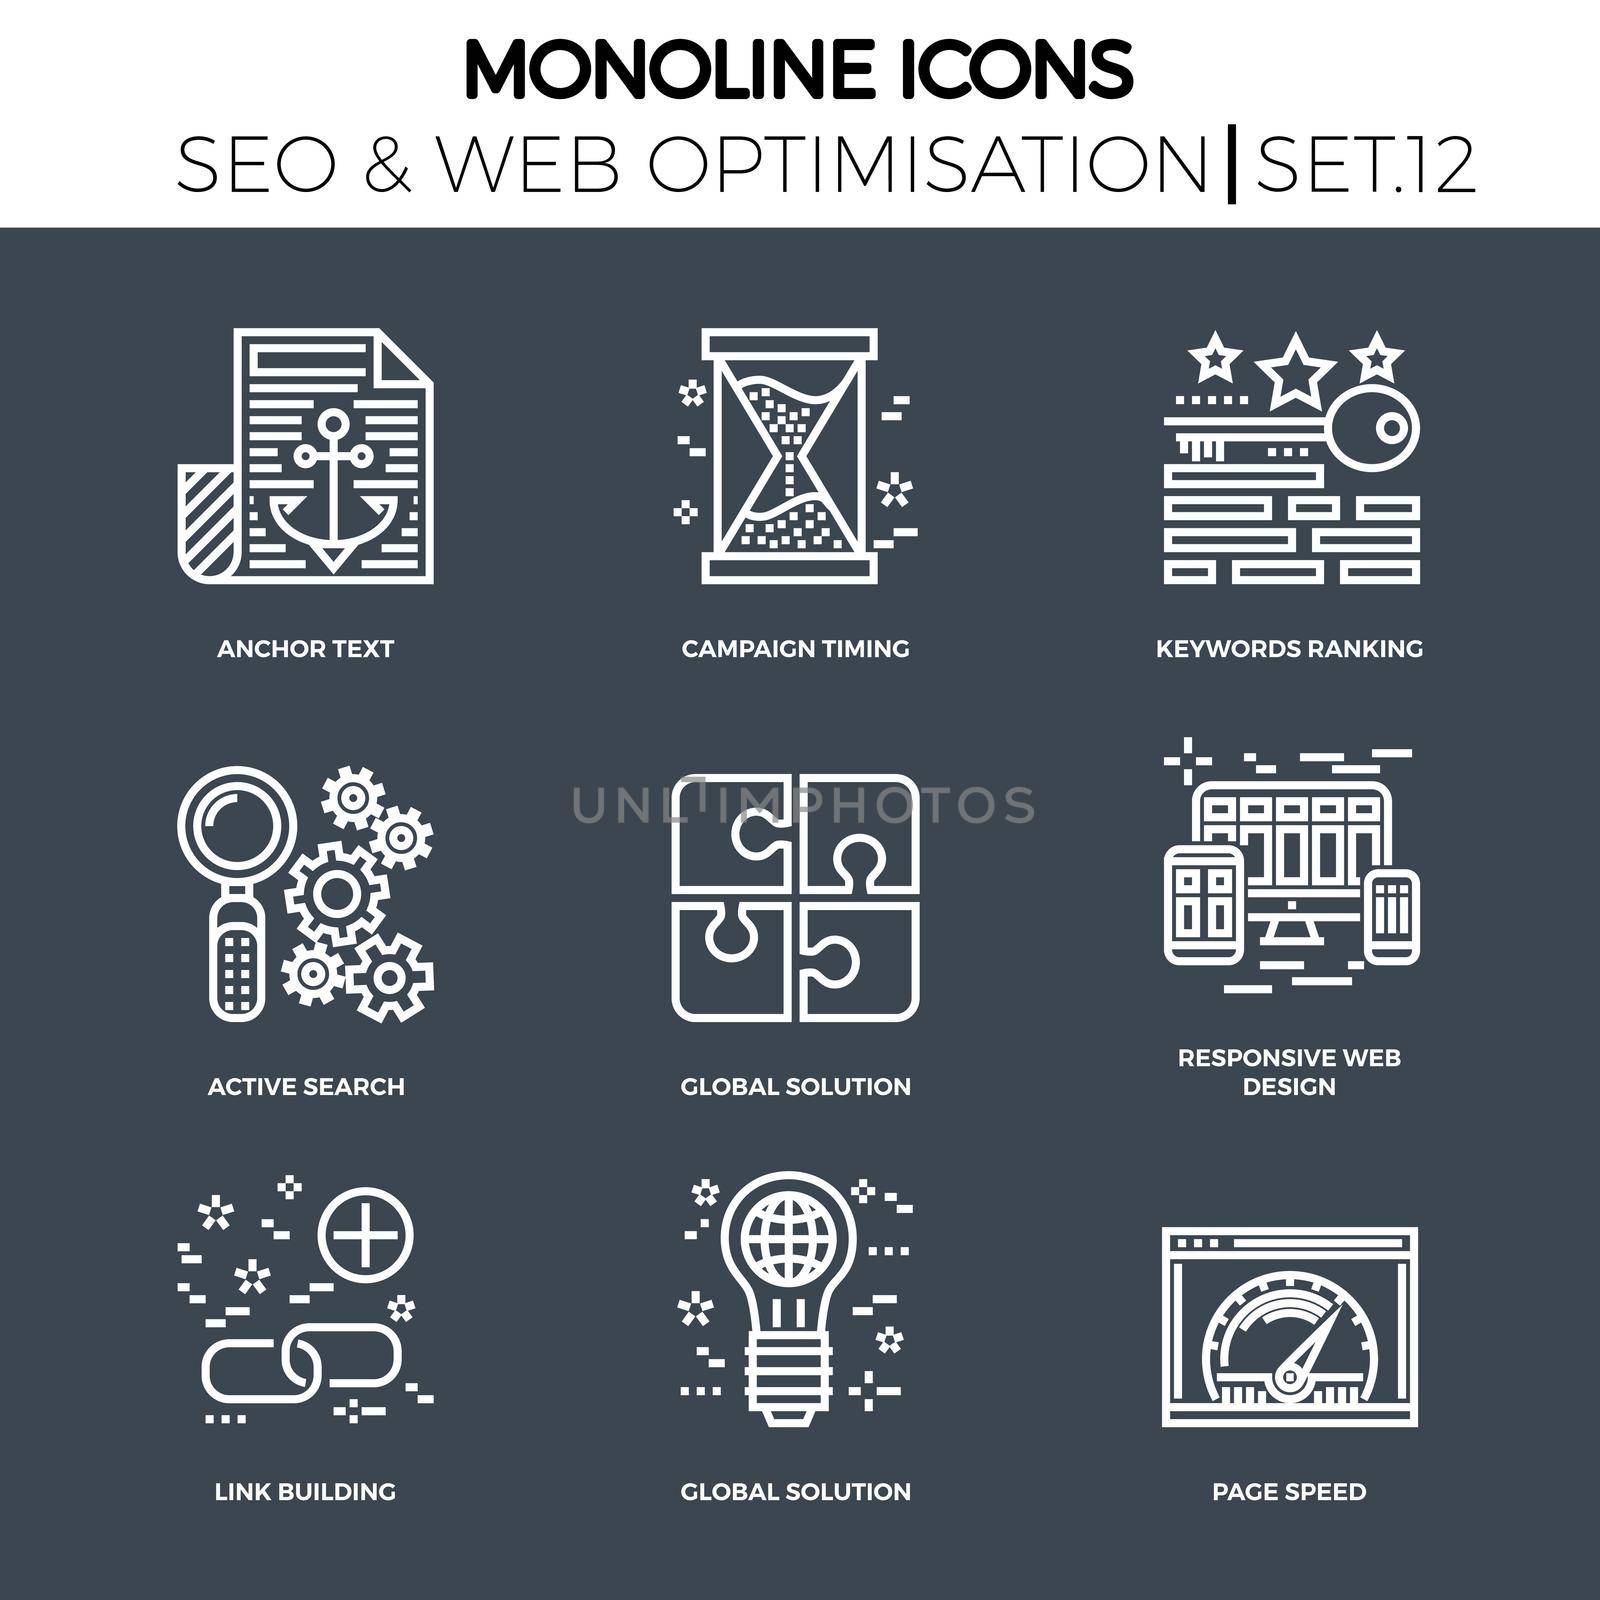 Line icons set with flat design of search engine optimization. Anchor text, campaign timing, keywords ranking, active search, global solution, responsive web design, link building, page speed.